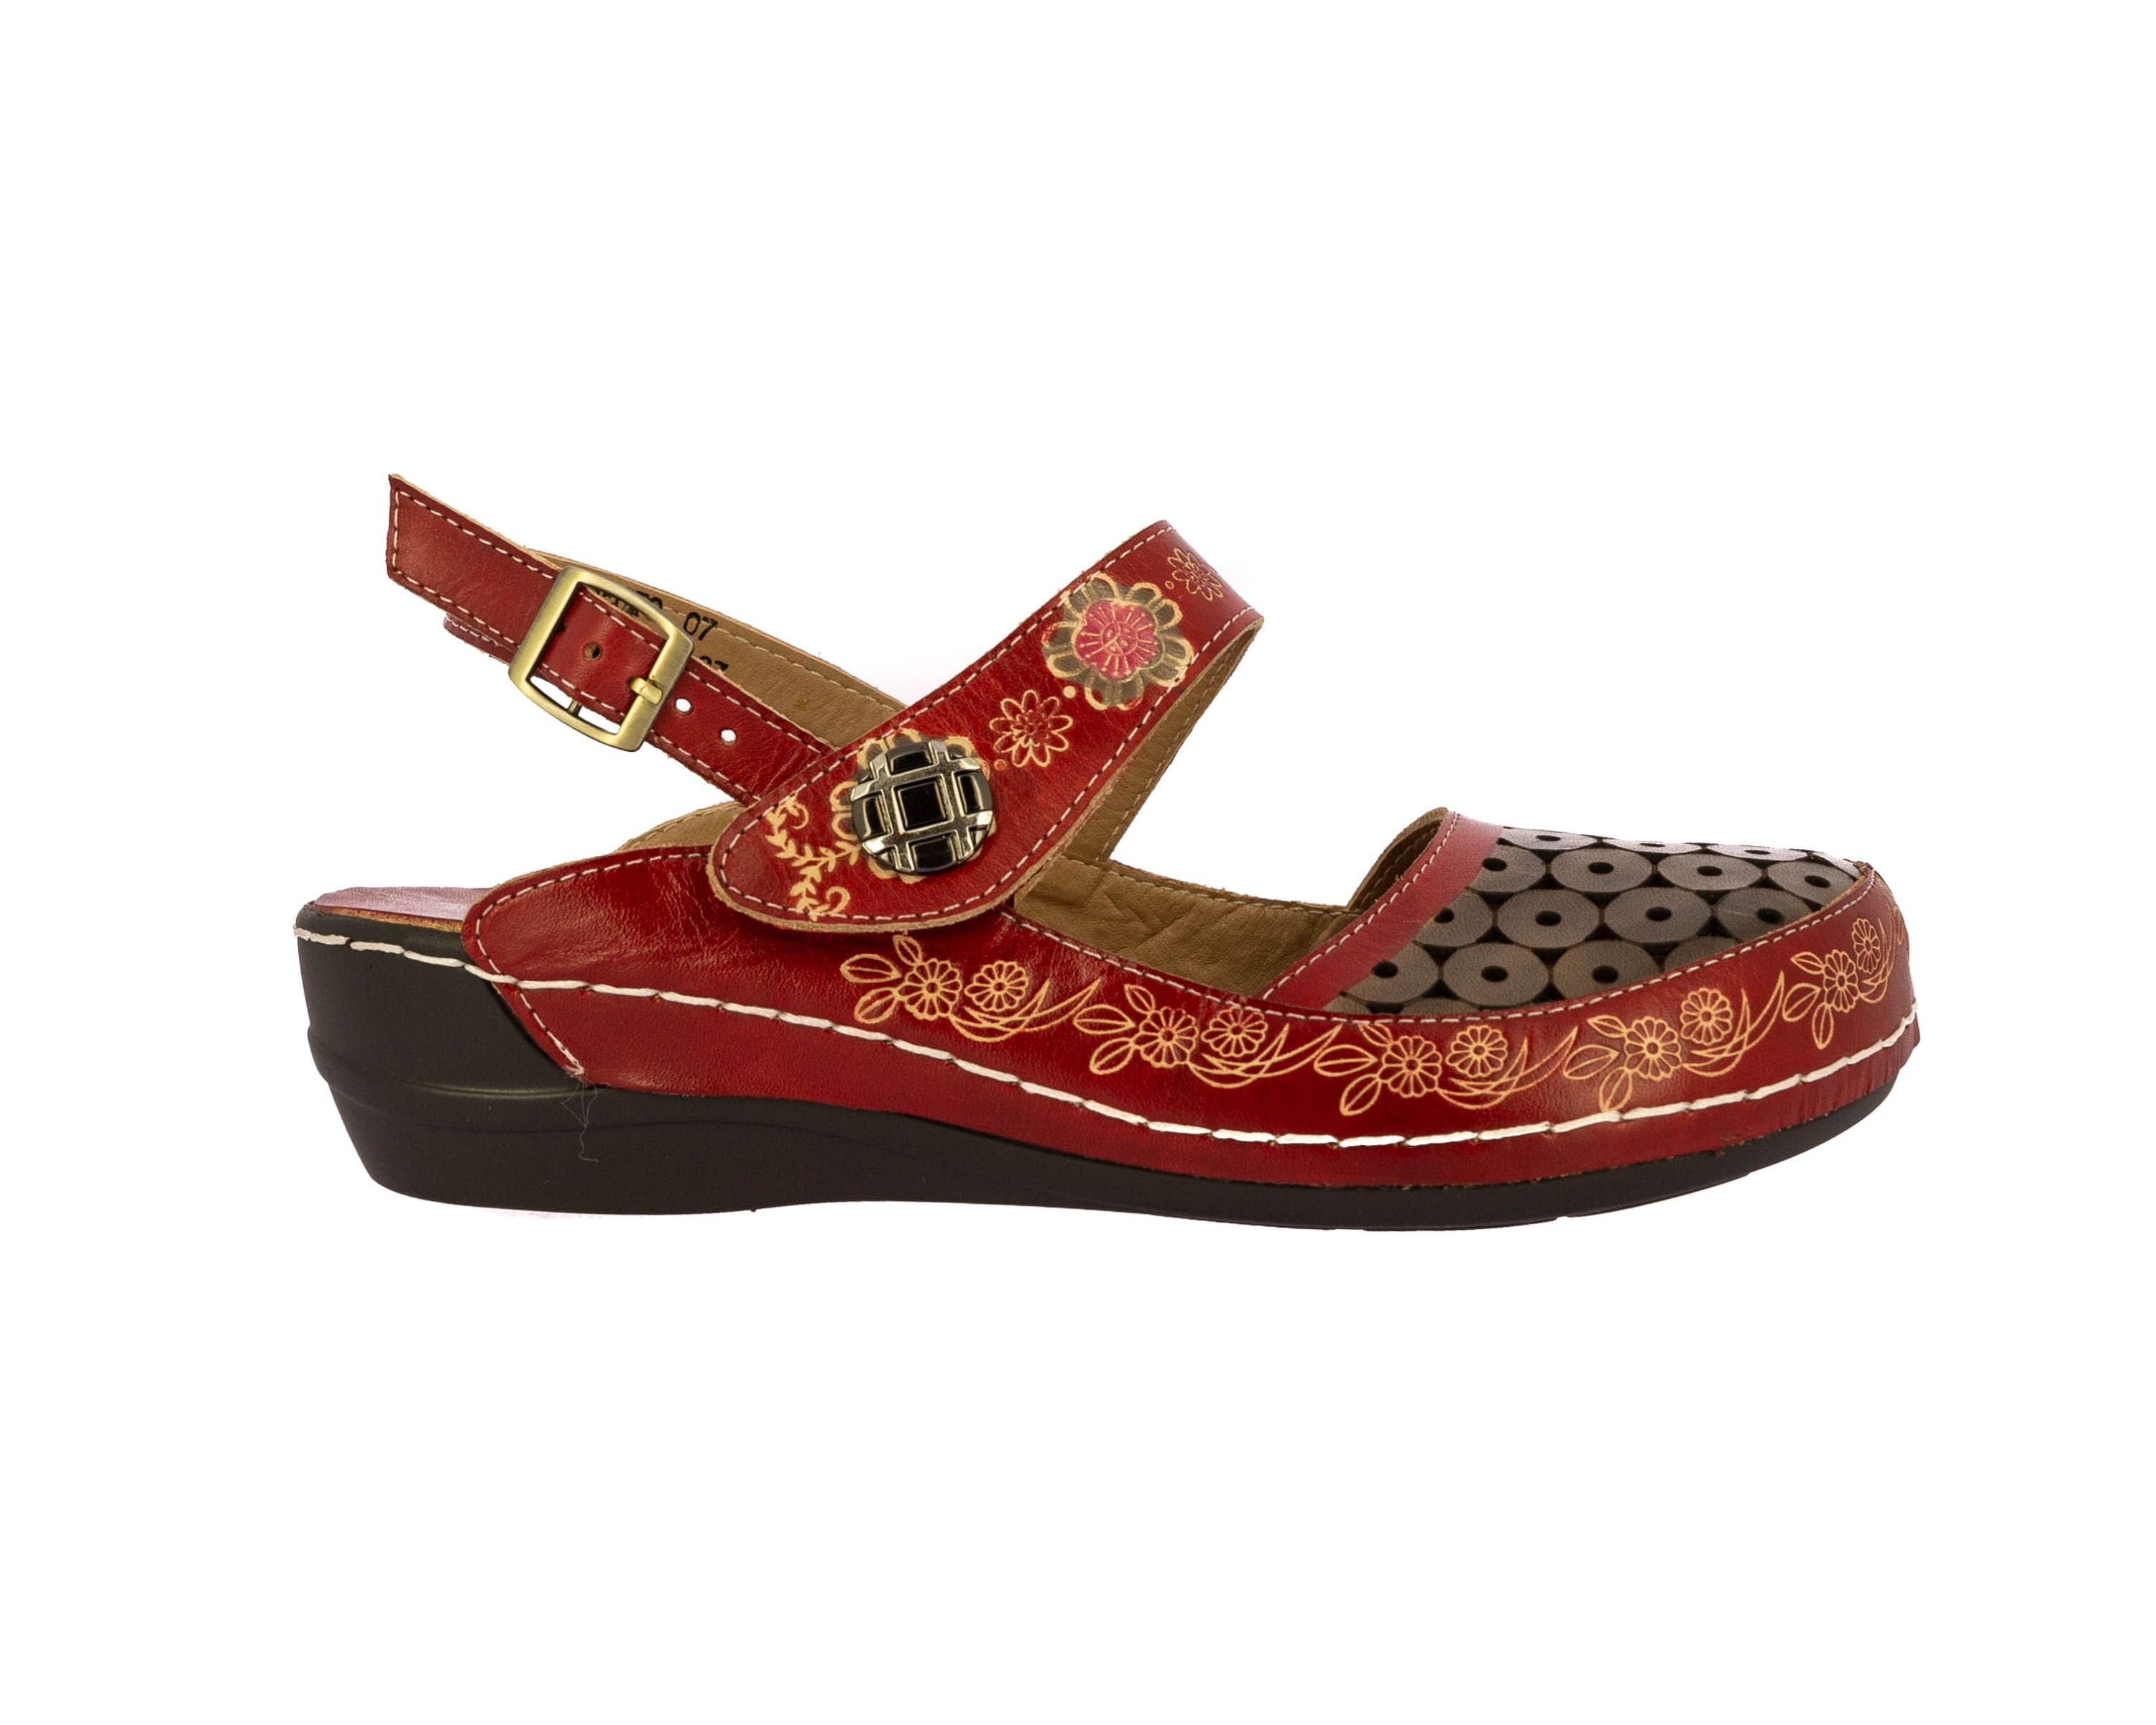 HECTO 07 shoes - 35 / RED - Sandal